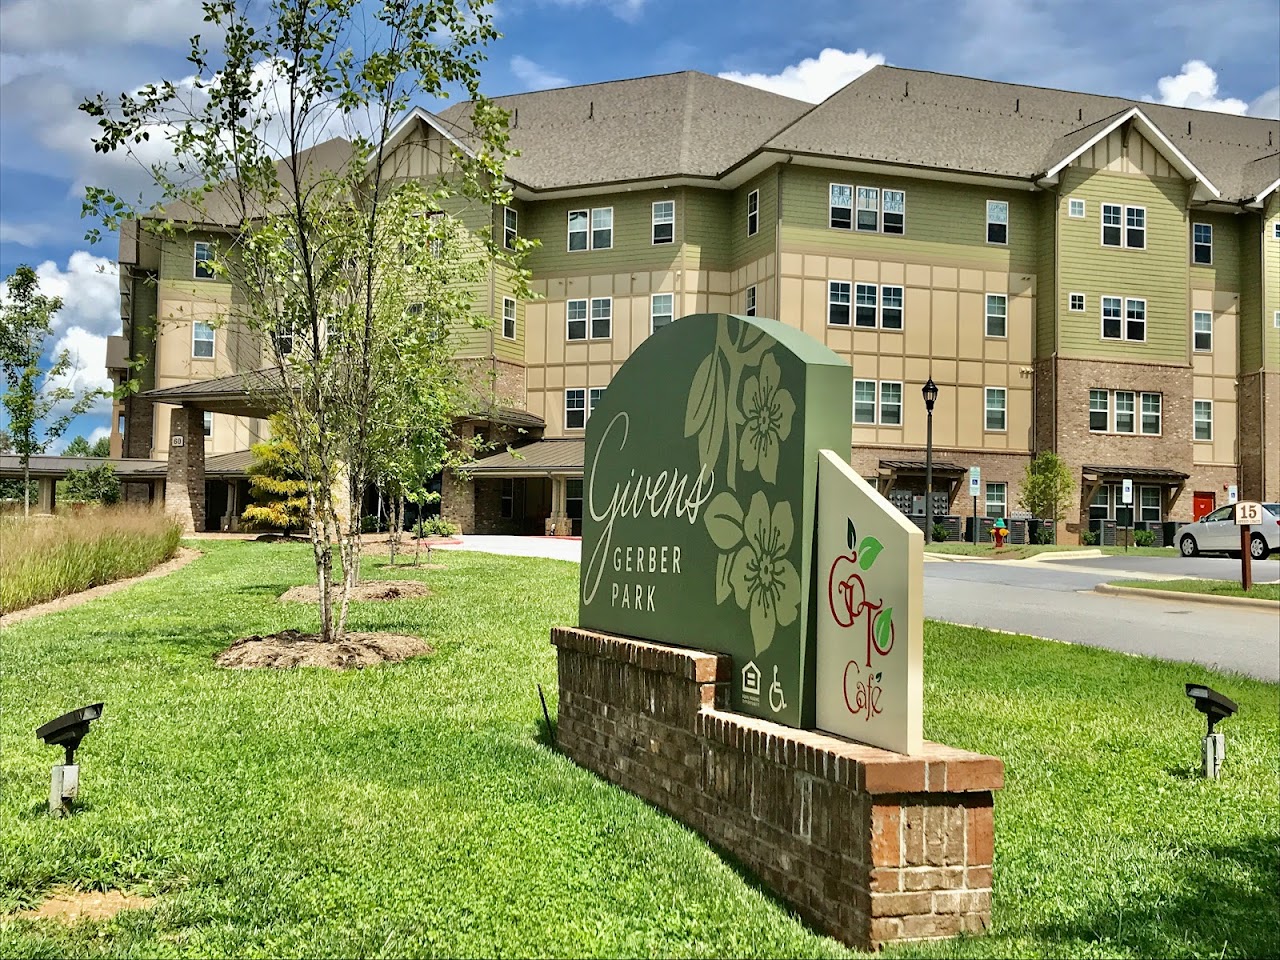 Photo of GIVENS GERBER PARK III. Affordable housing located at 50 GERBER ROAD ASHEVILLE, NC 28803